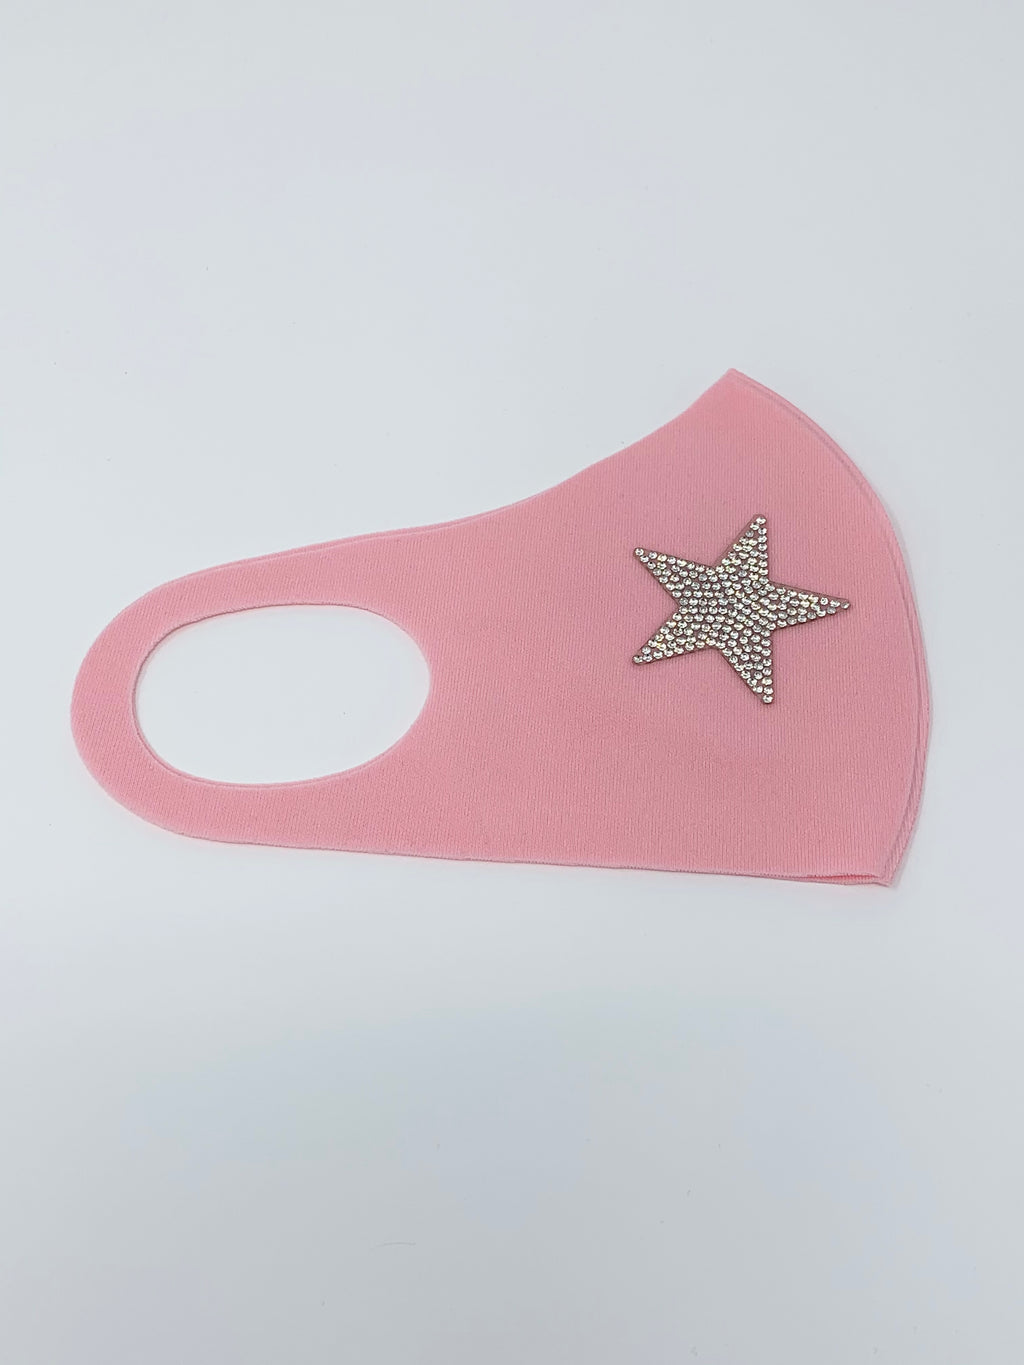 Rhinestone Face Mask - You're a Star (Pink)